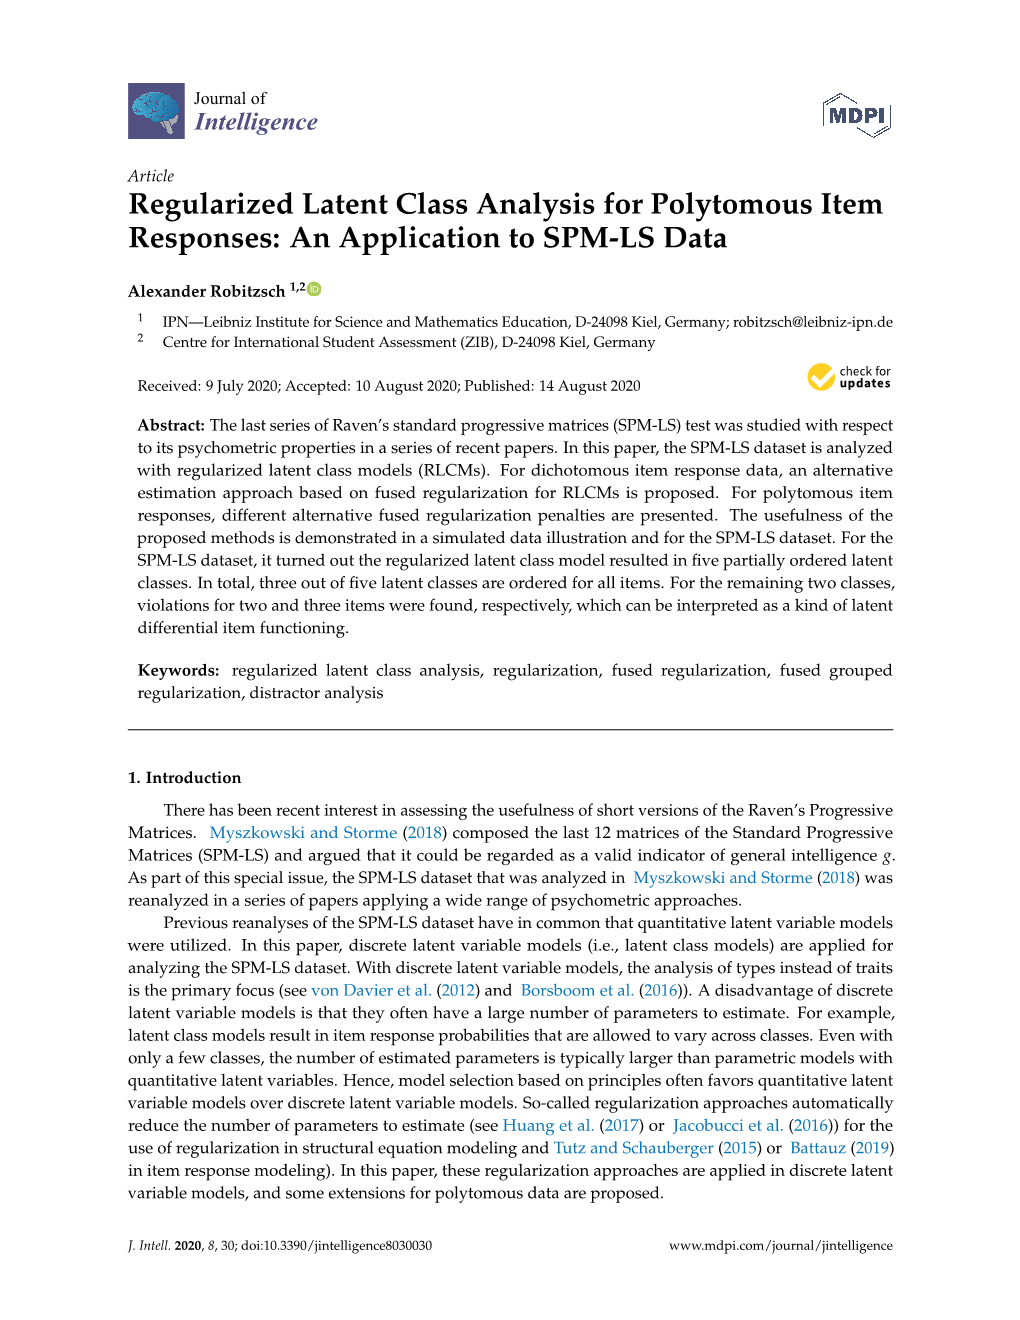 Regularized Latent Class Analysis for Polytomous Item Responses: an Application to SPM-LS Data